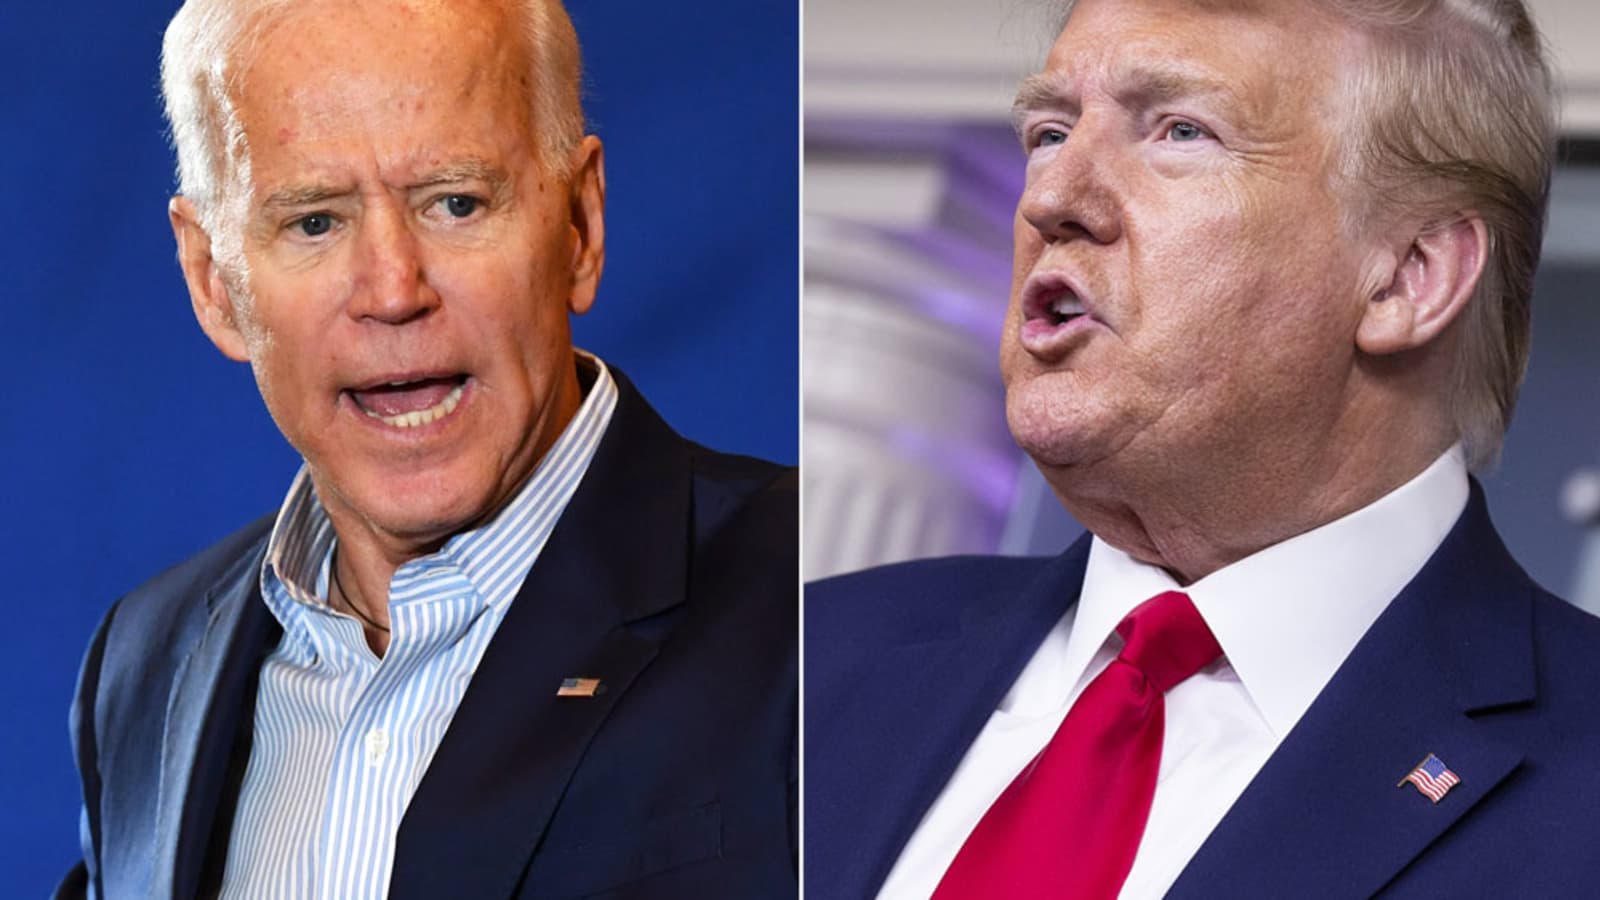 Trump vs. Biden: Survey shows who will be better for personal finances